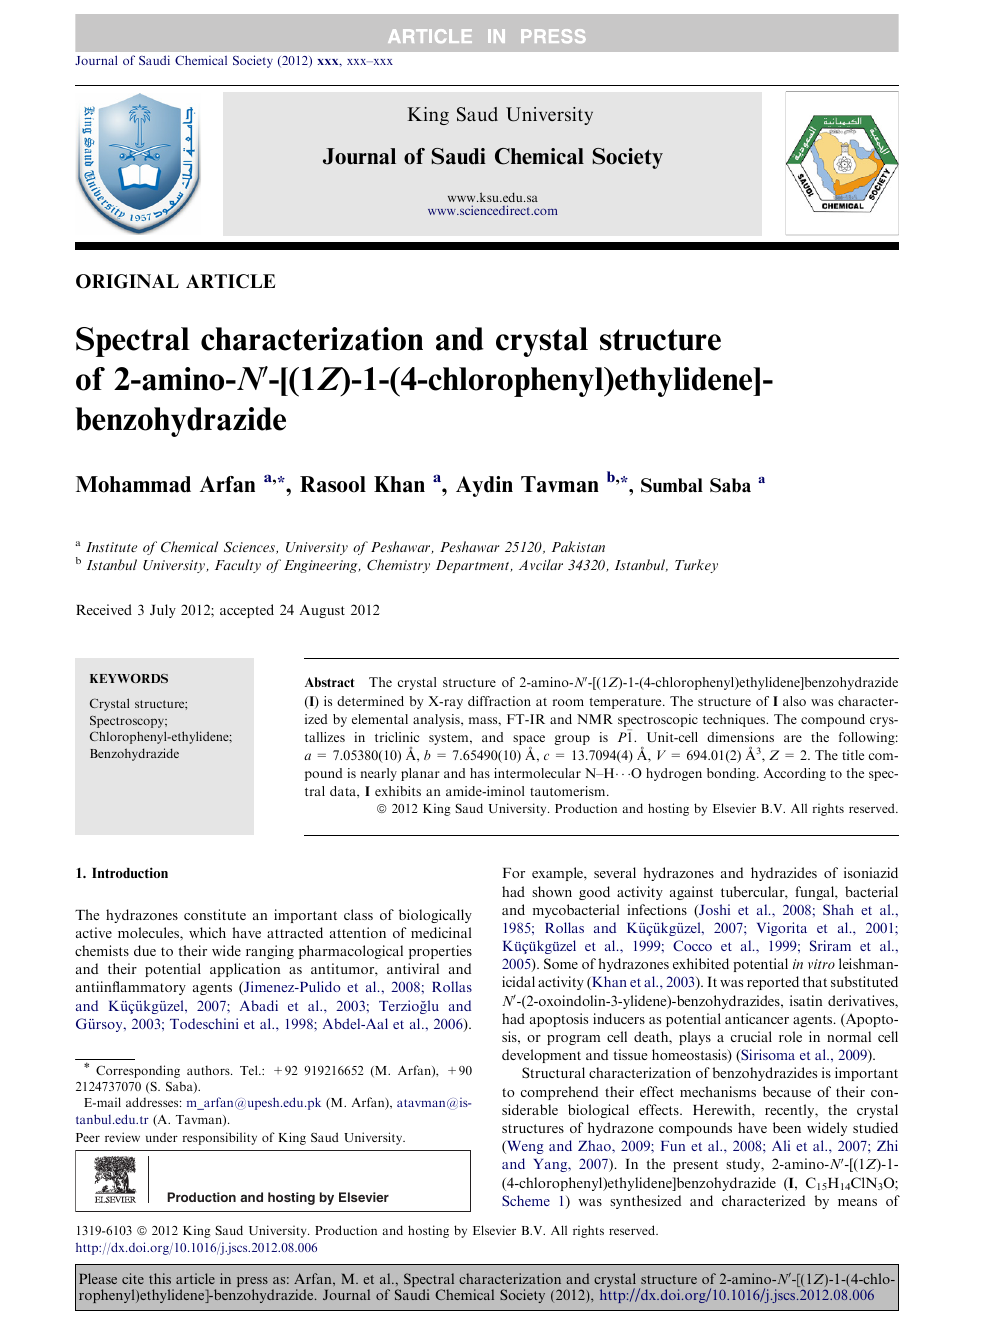 Spectral Characterization And Crystal Structure Of 2 Amino N 1z 1 4 Chlorophenyl Ethylidene Benzohydrazide Topic Of Research Paper In Chemical Sciences Download Scholarly Article Pdf And Read For Free On Cyberleninka Open Science Hub